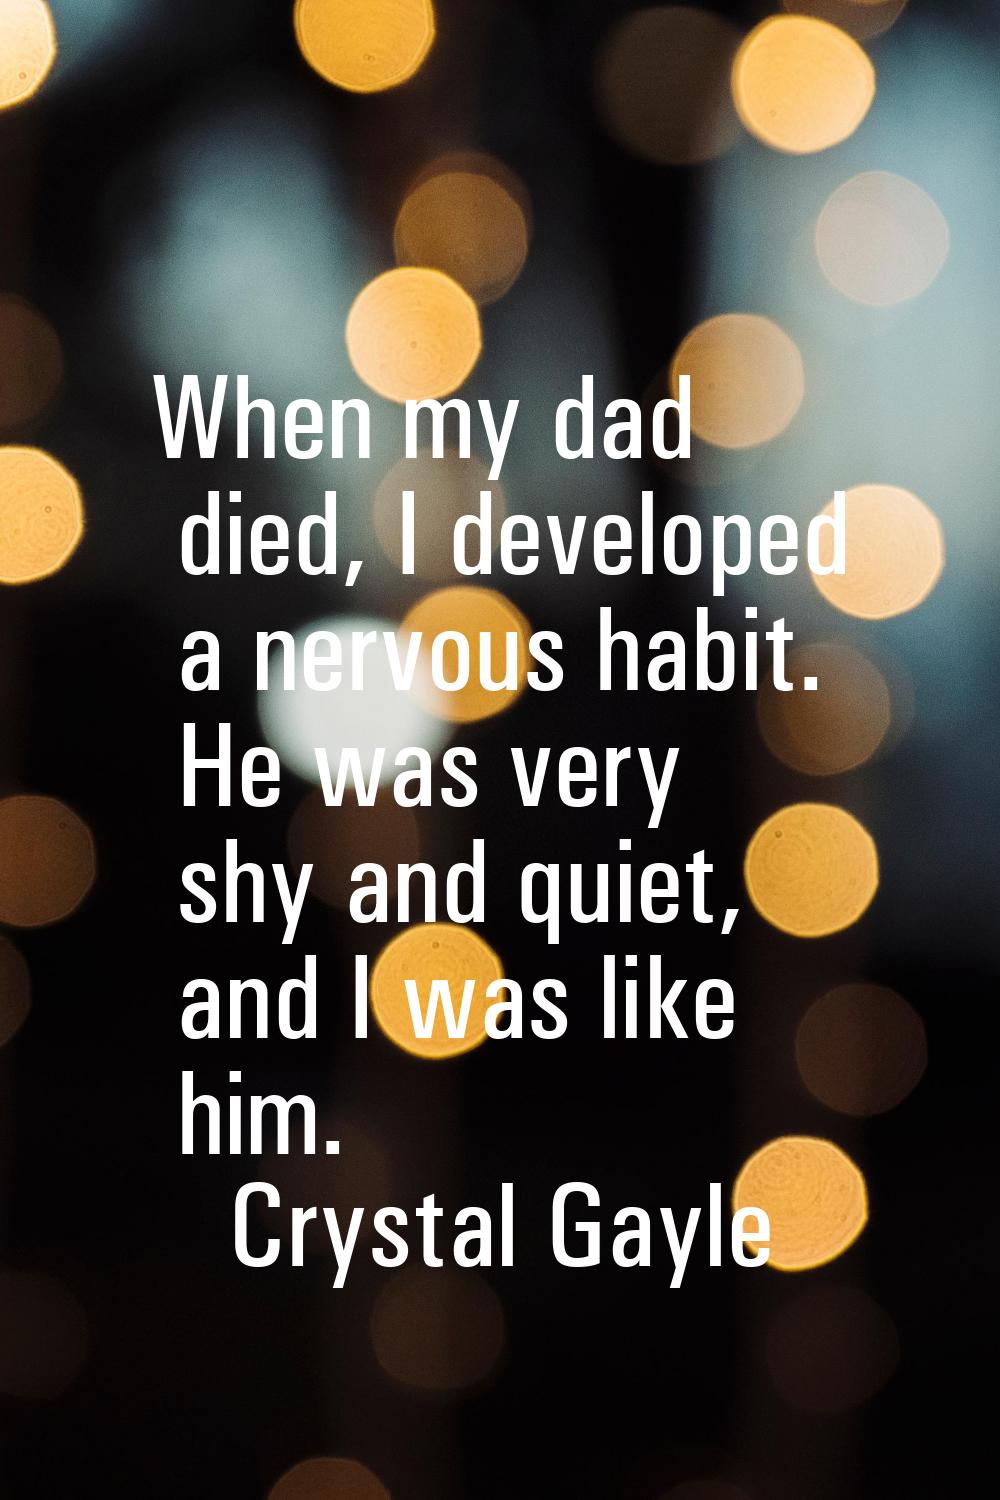 When my dad died, I developed a nervous habit. He was very shy and quiet, and I was like him.